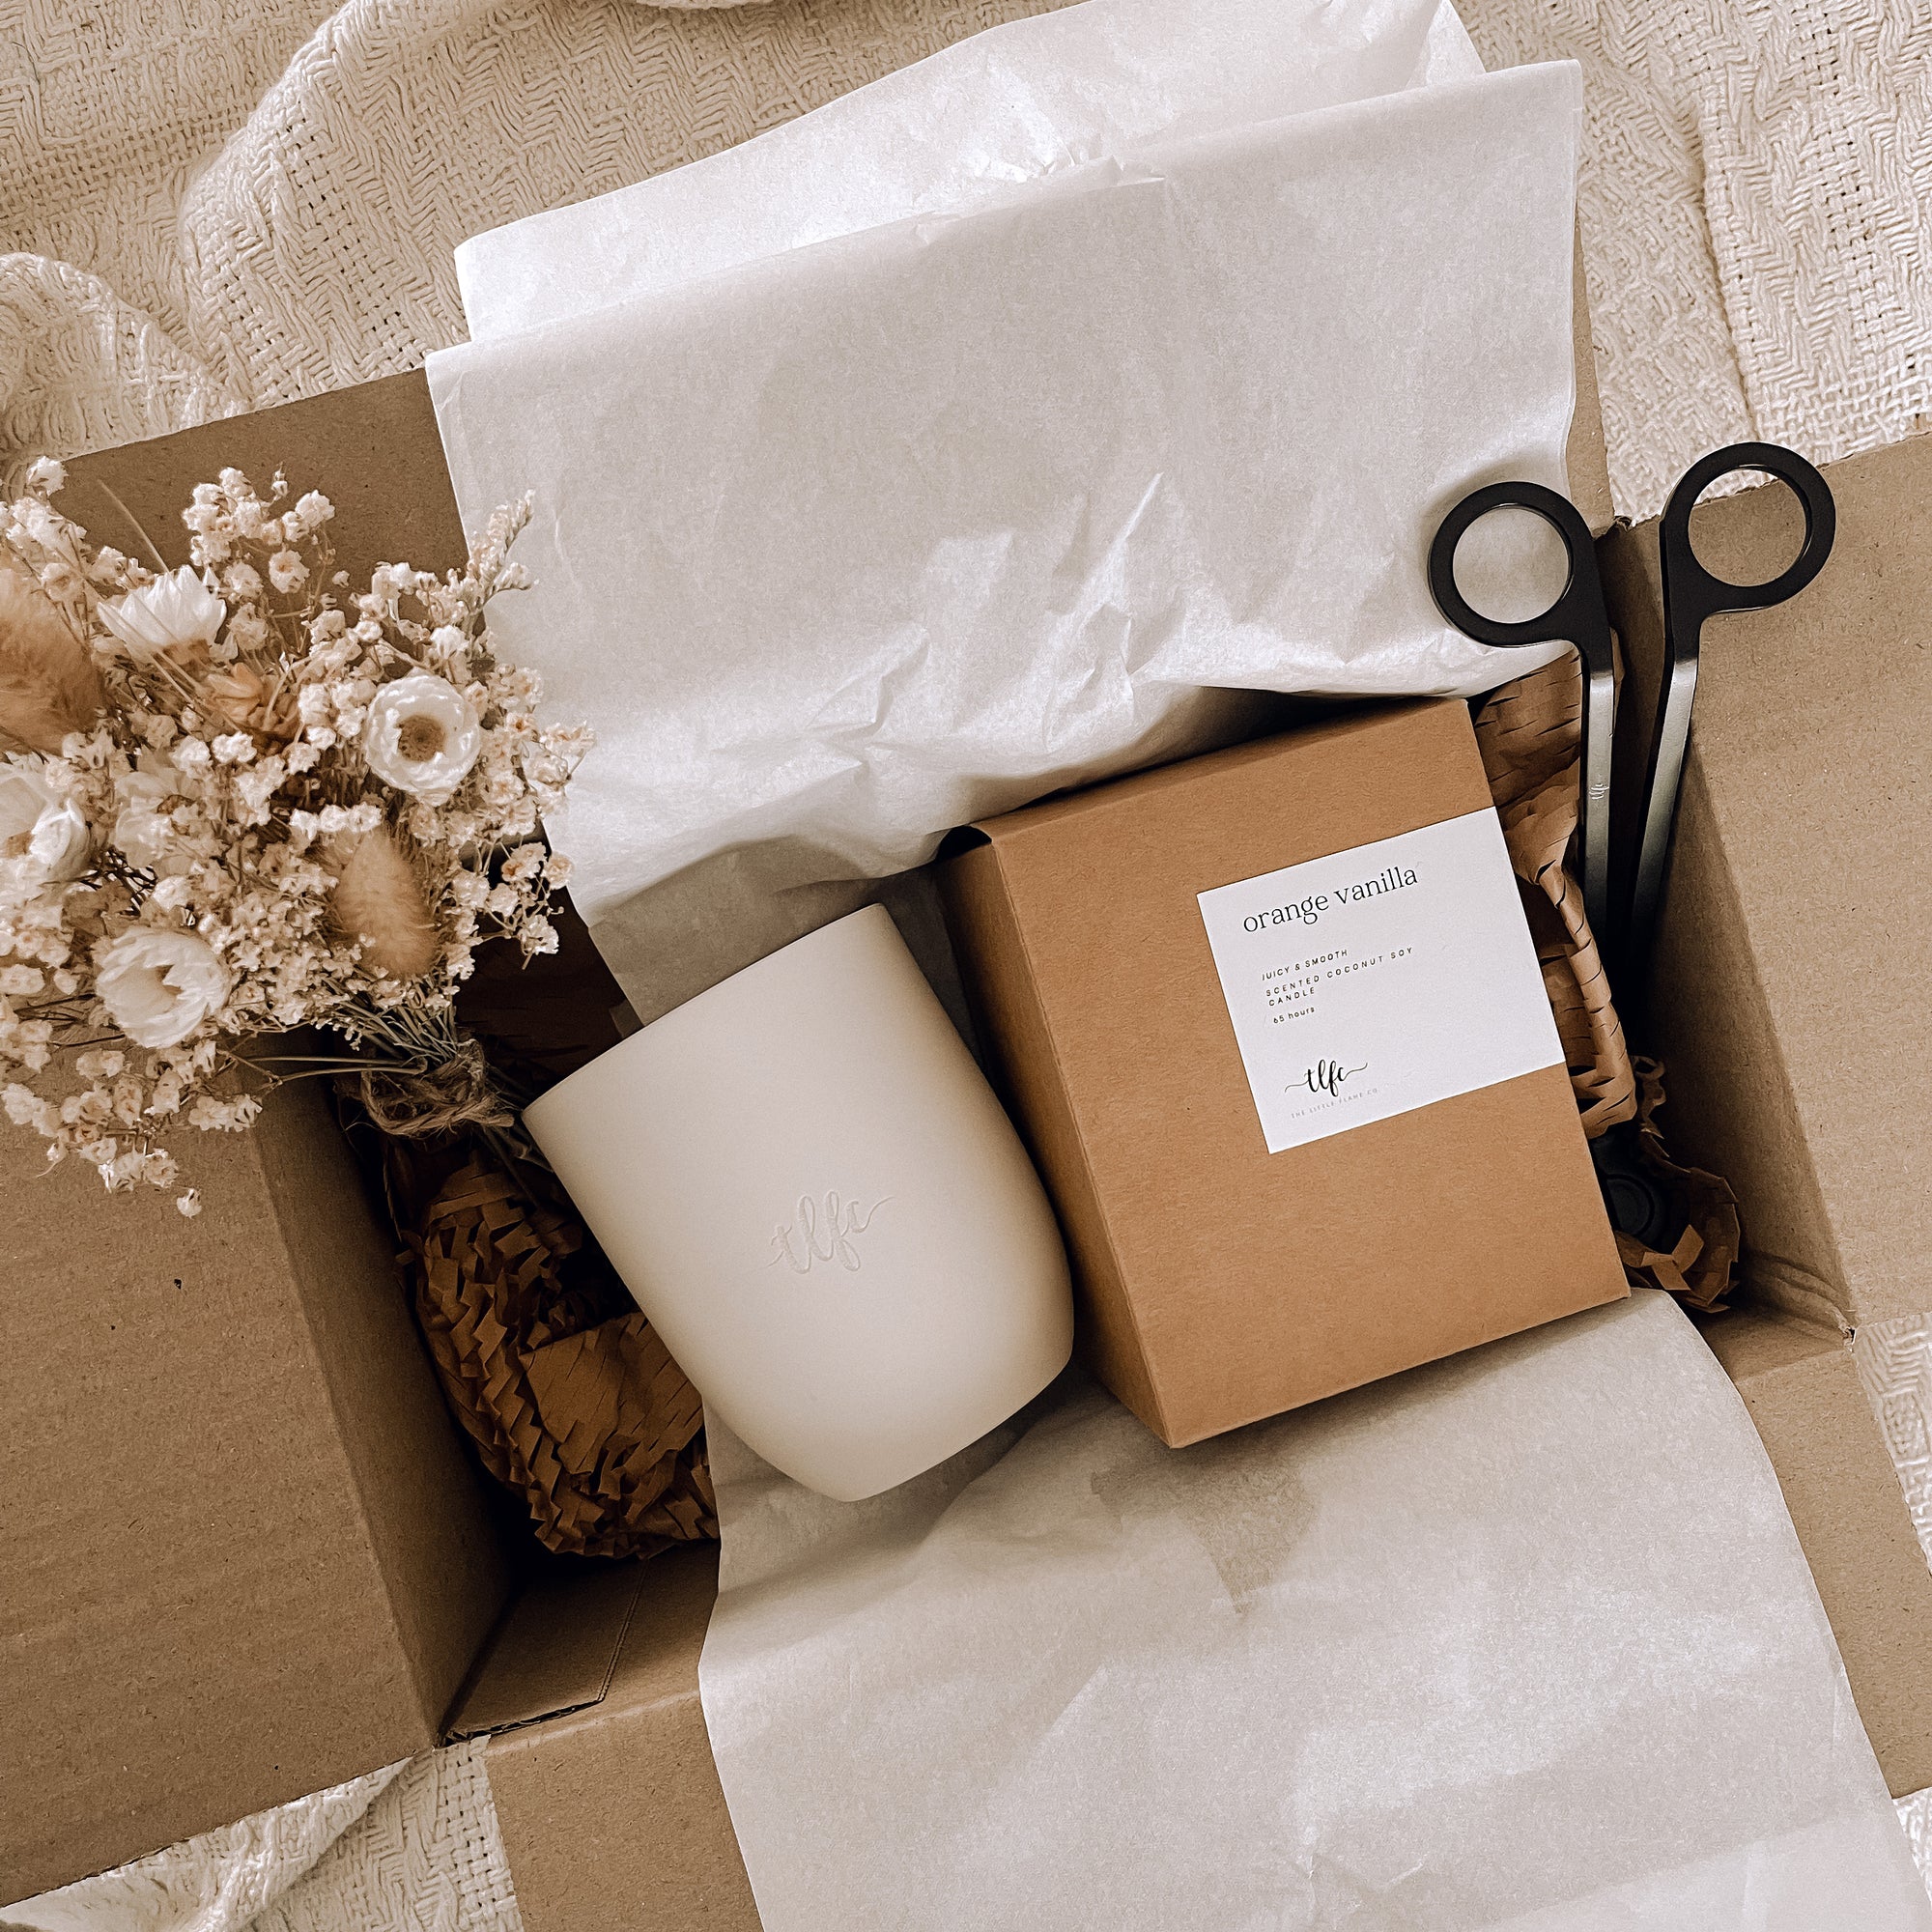 Candle Subscription Box - 3 Month